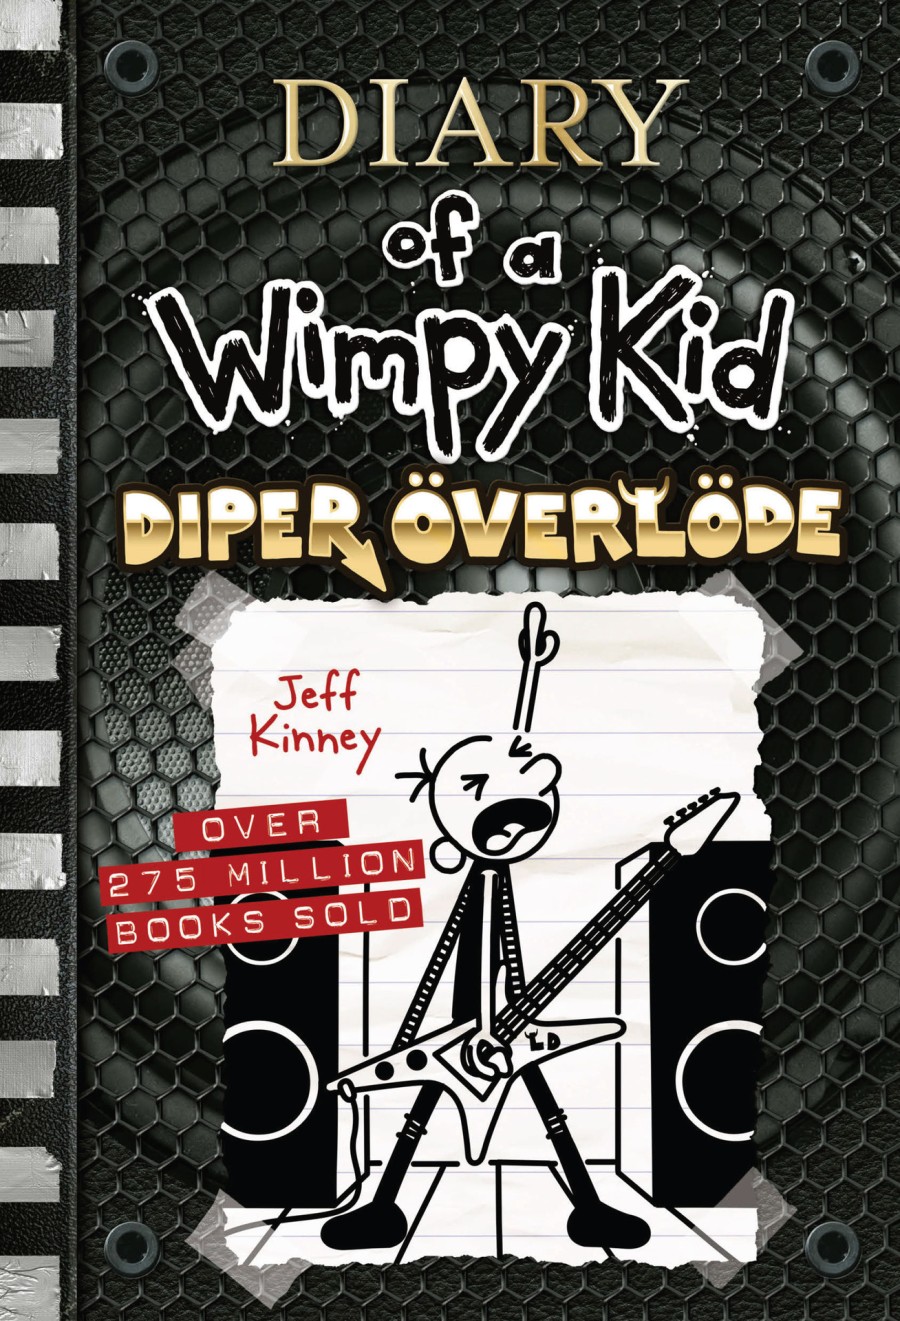 Diary of a wimpy kid : diper overlode